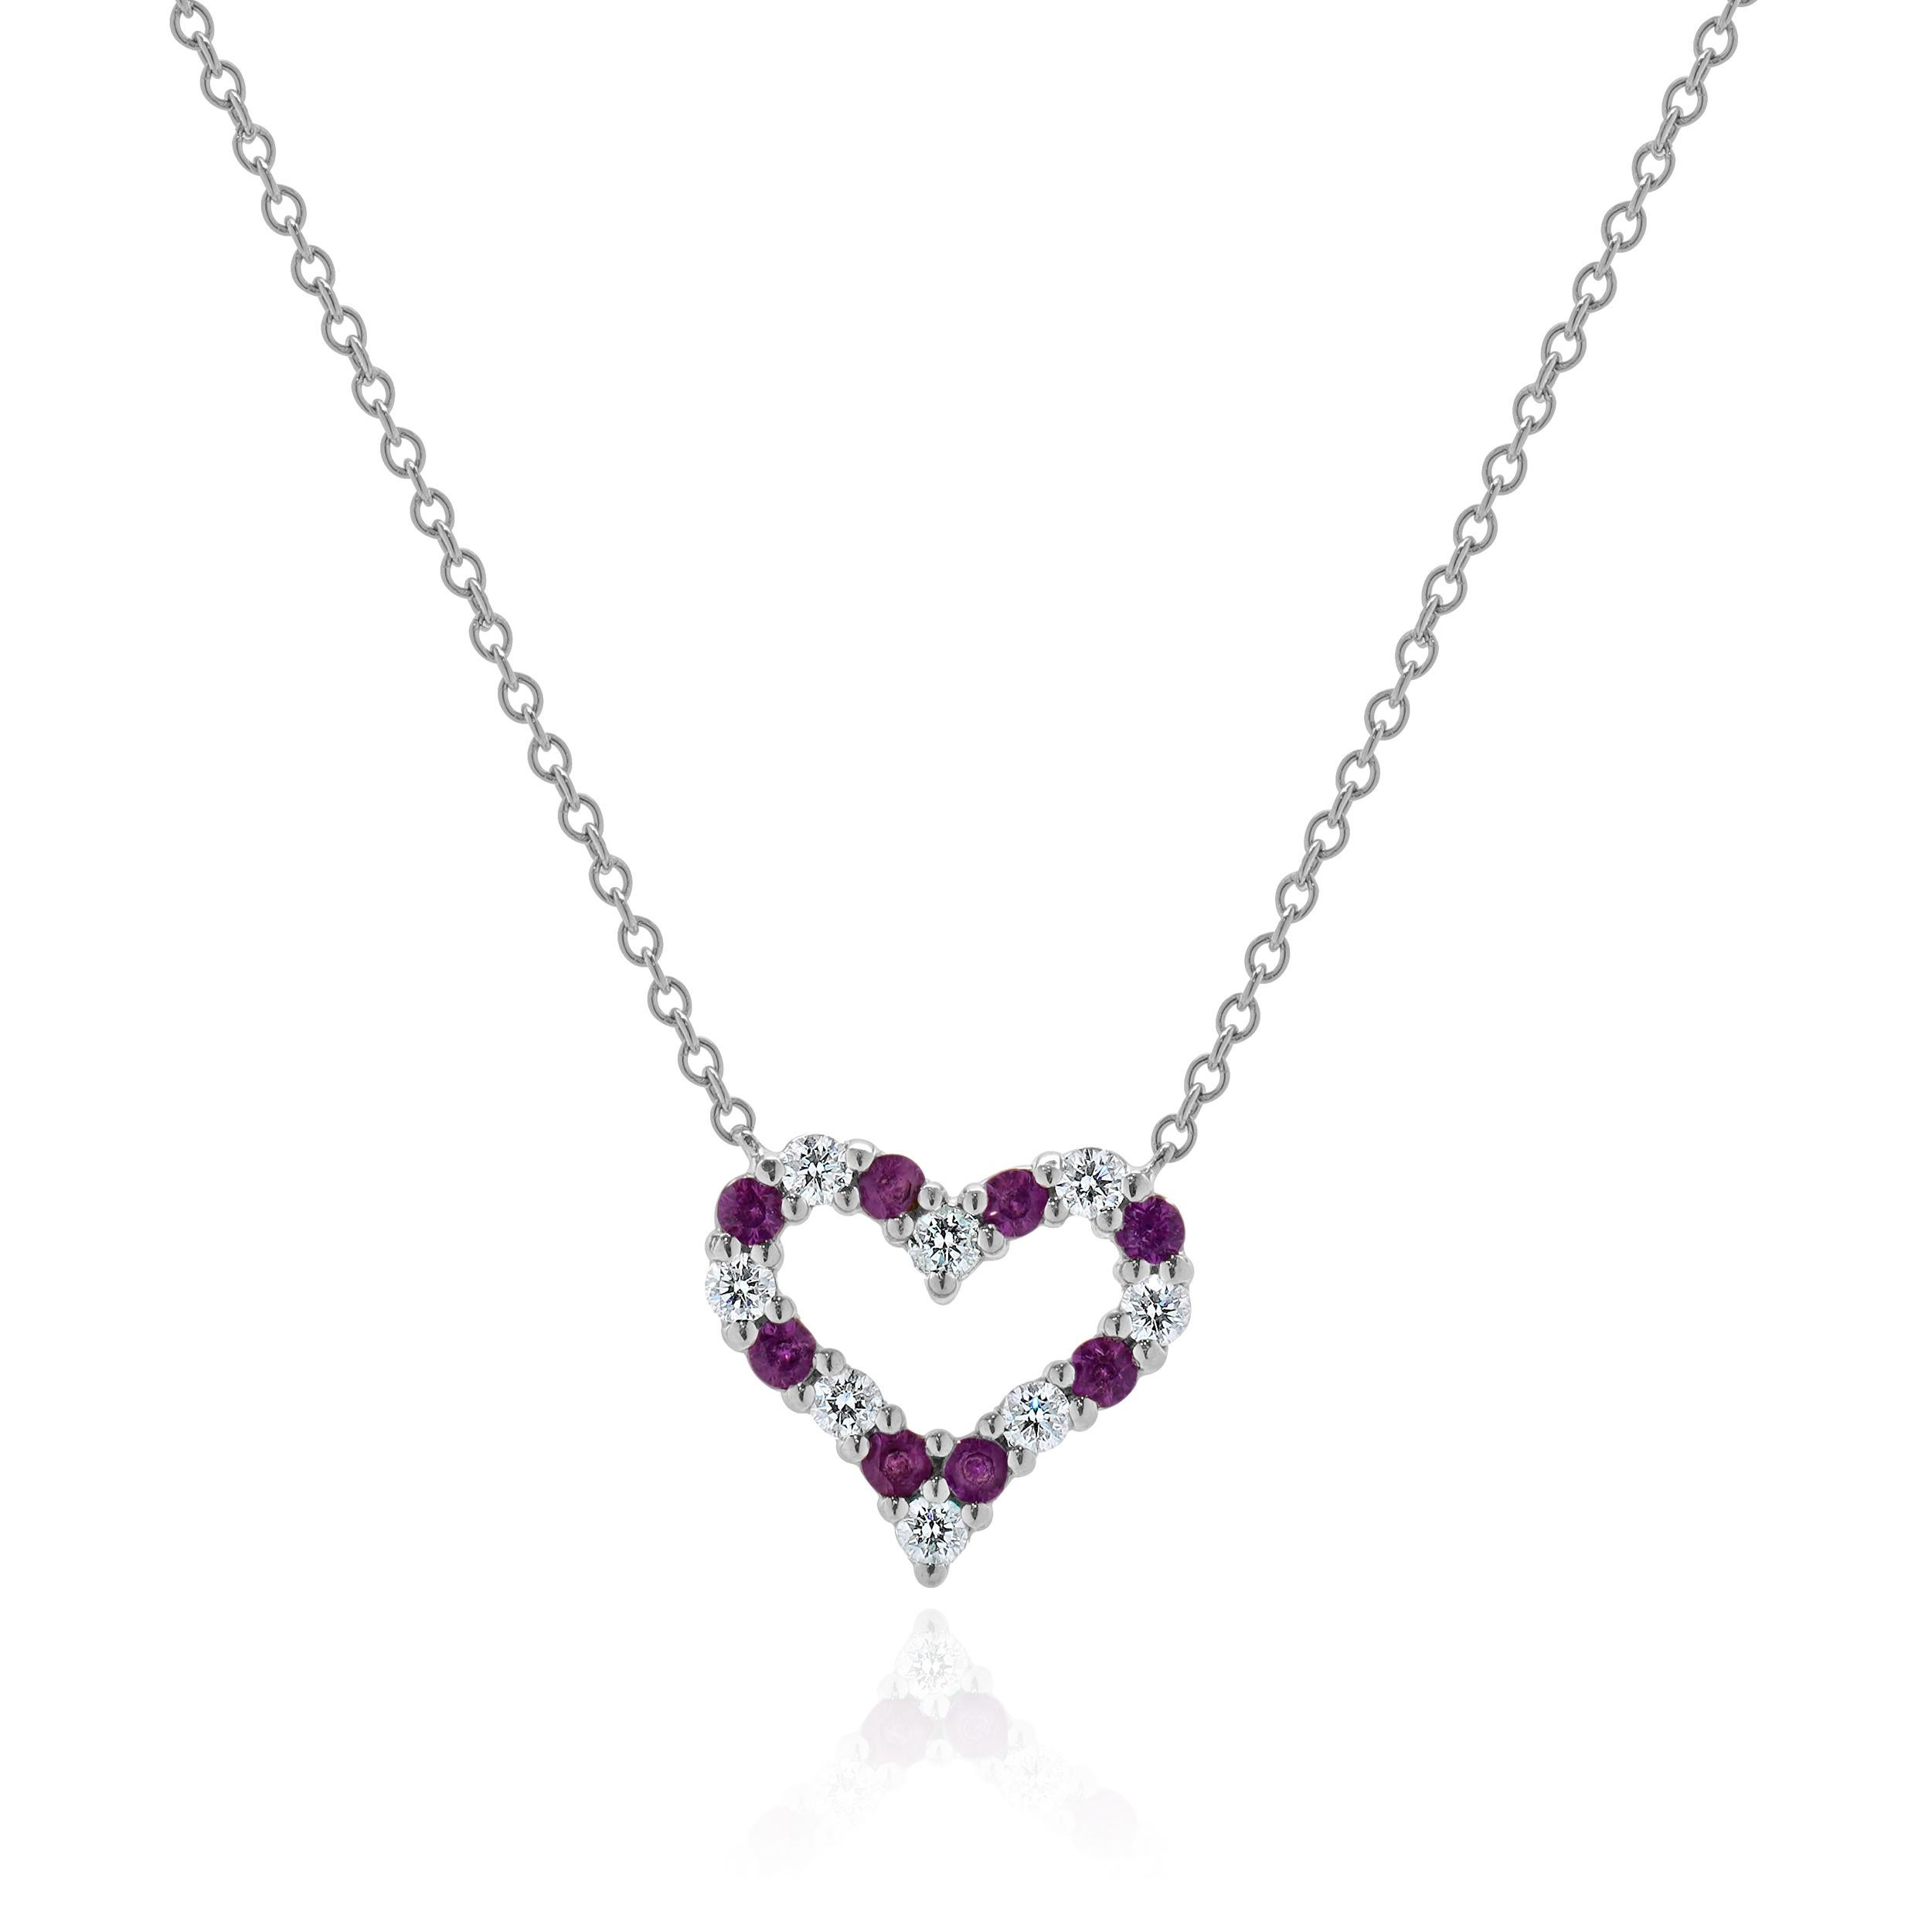 Designer: Tiffany & Co. 
Material: platinum
Diamond: 8 round brilliant cut = 0.20cttw
Color: G
Clarity: VS1-2
Pink Sapphire: 8 round cut = 0.24cttw
Dimensions: necklace measures 16.5-inches
Weight: 3.52 grams